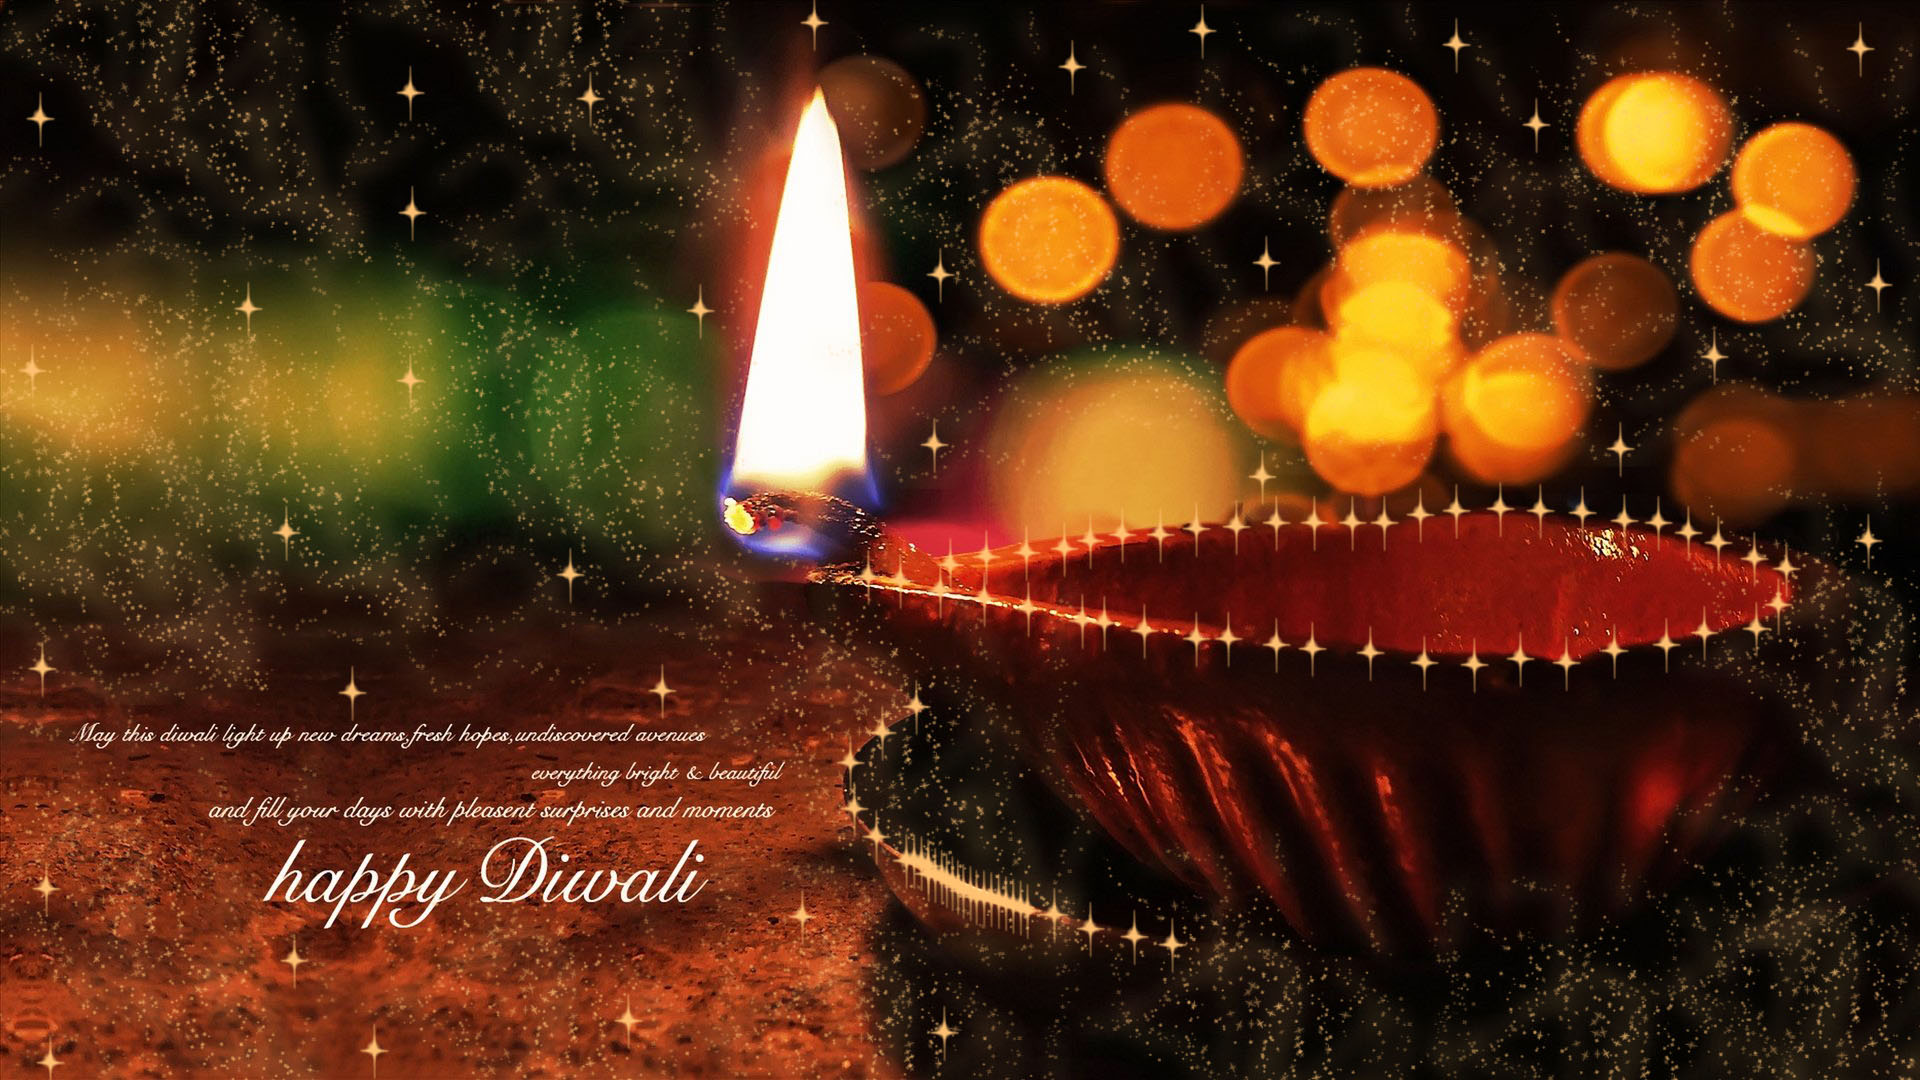 diwali-wishes-quotes-posters-cards-2017